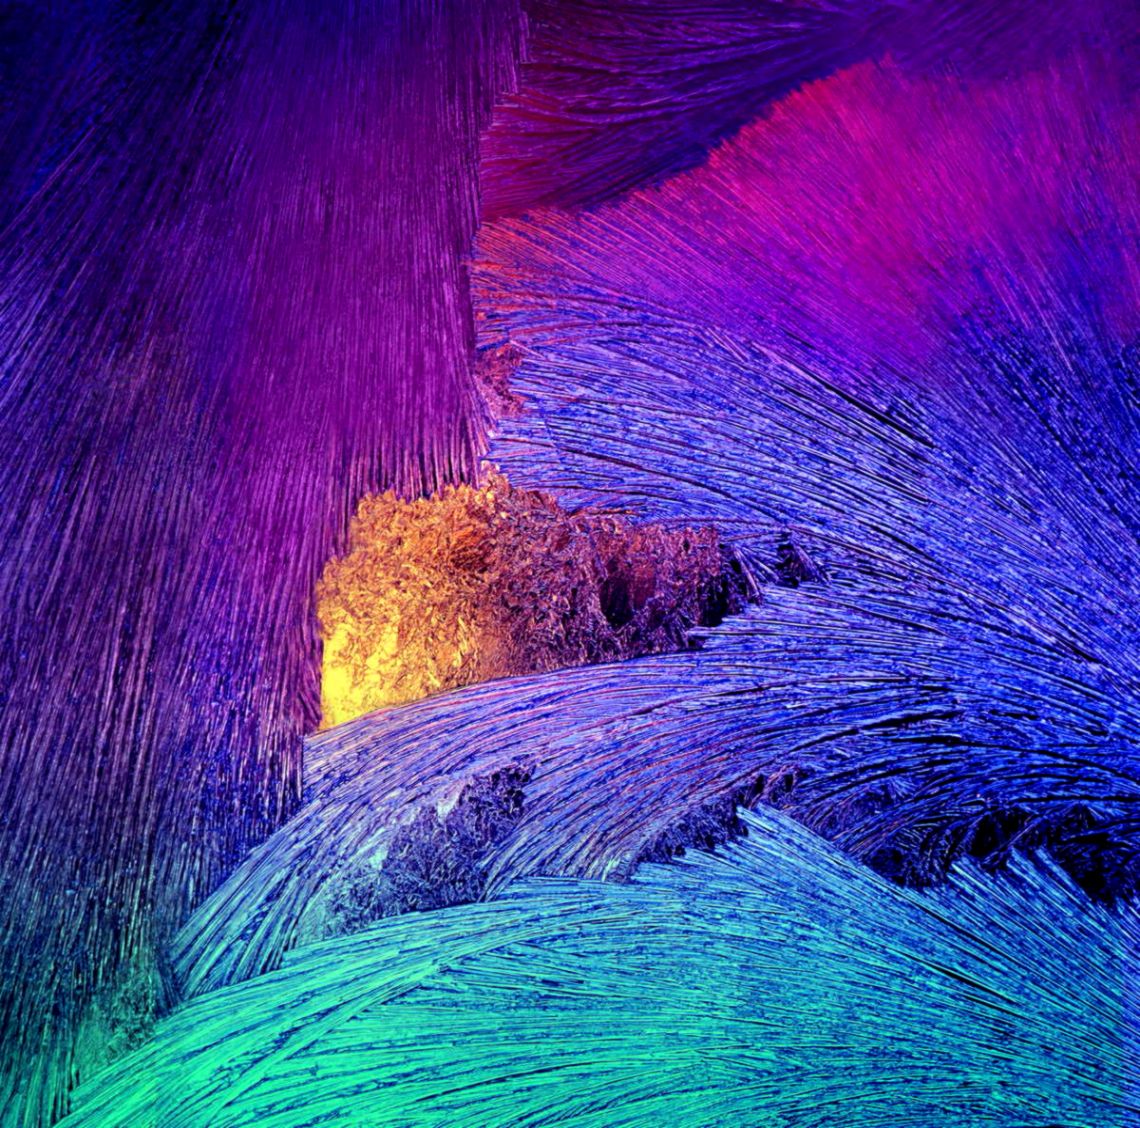 Download Some Of The Note 4 Wallpapers Here - Samsung Themes Full Hd - HD Wallpaper 